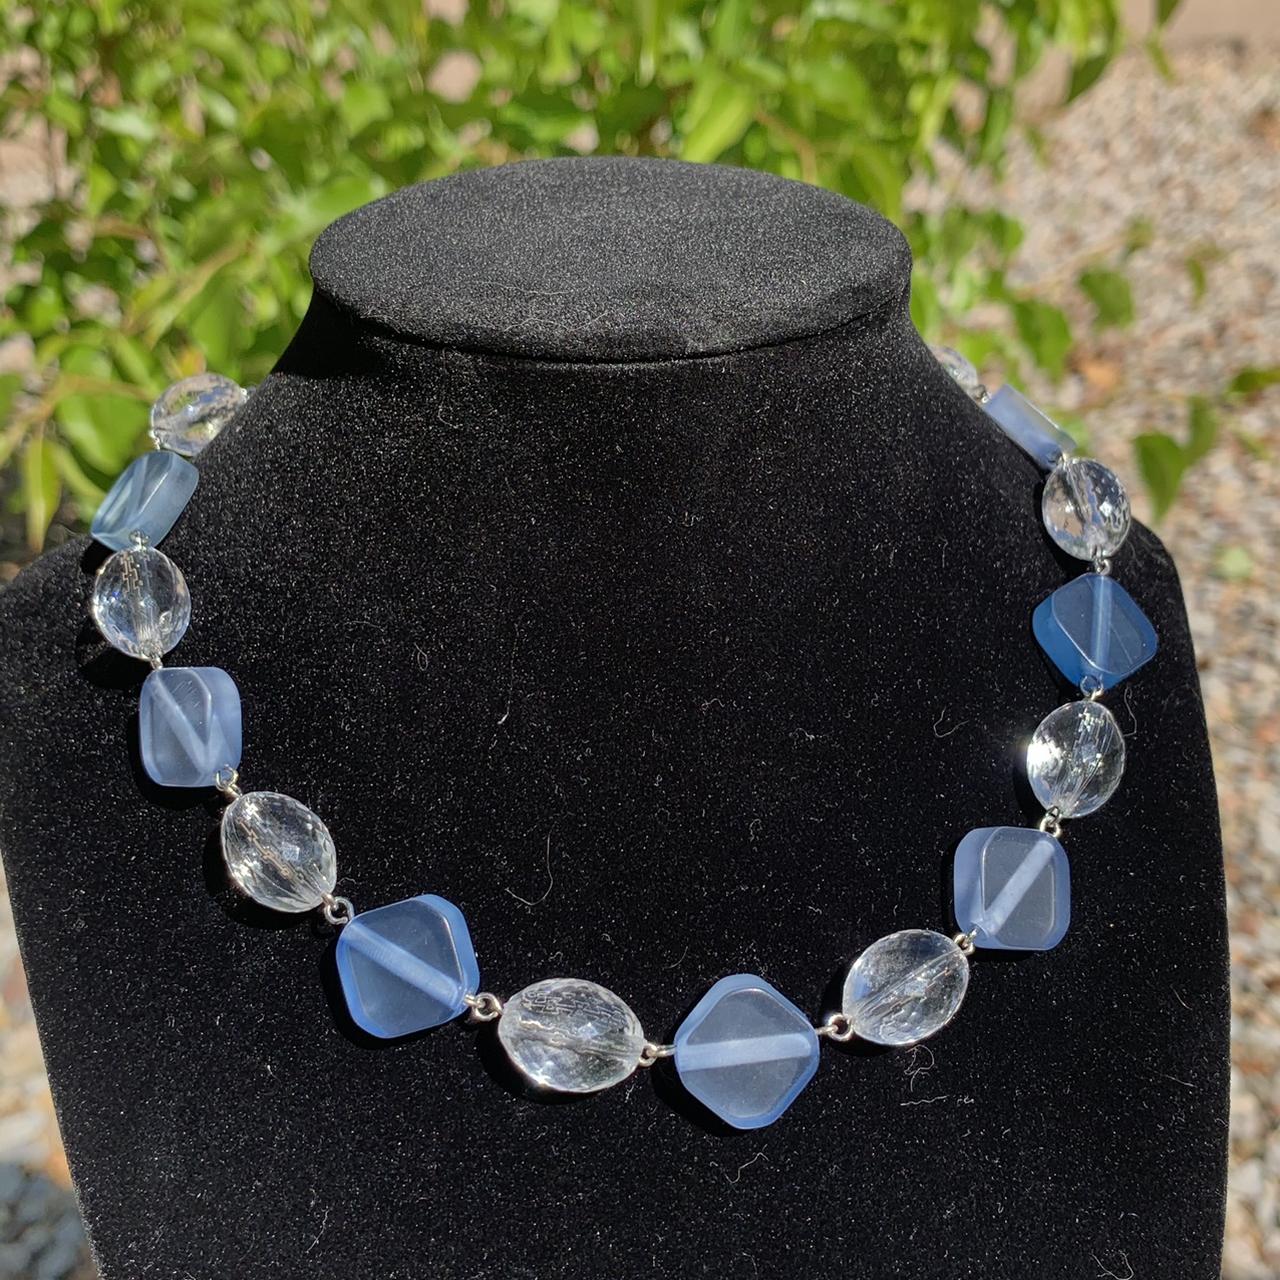 Women's Blue and White Jewellery